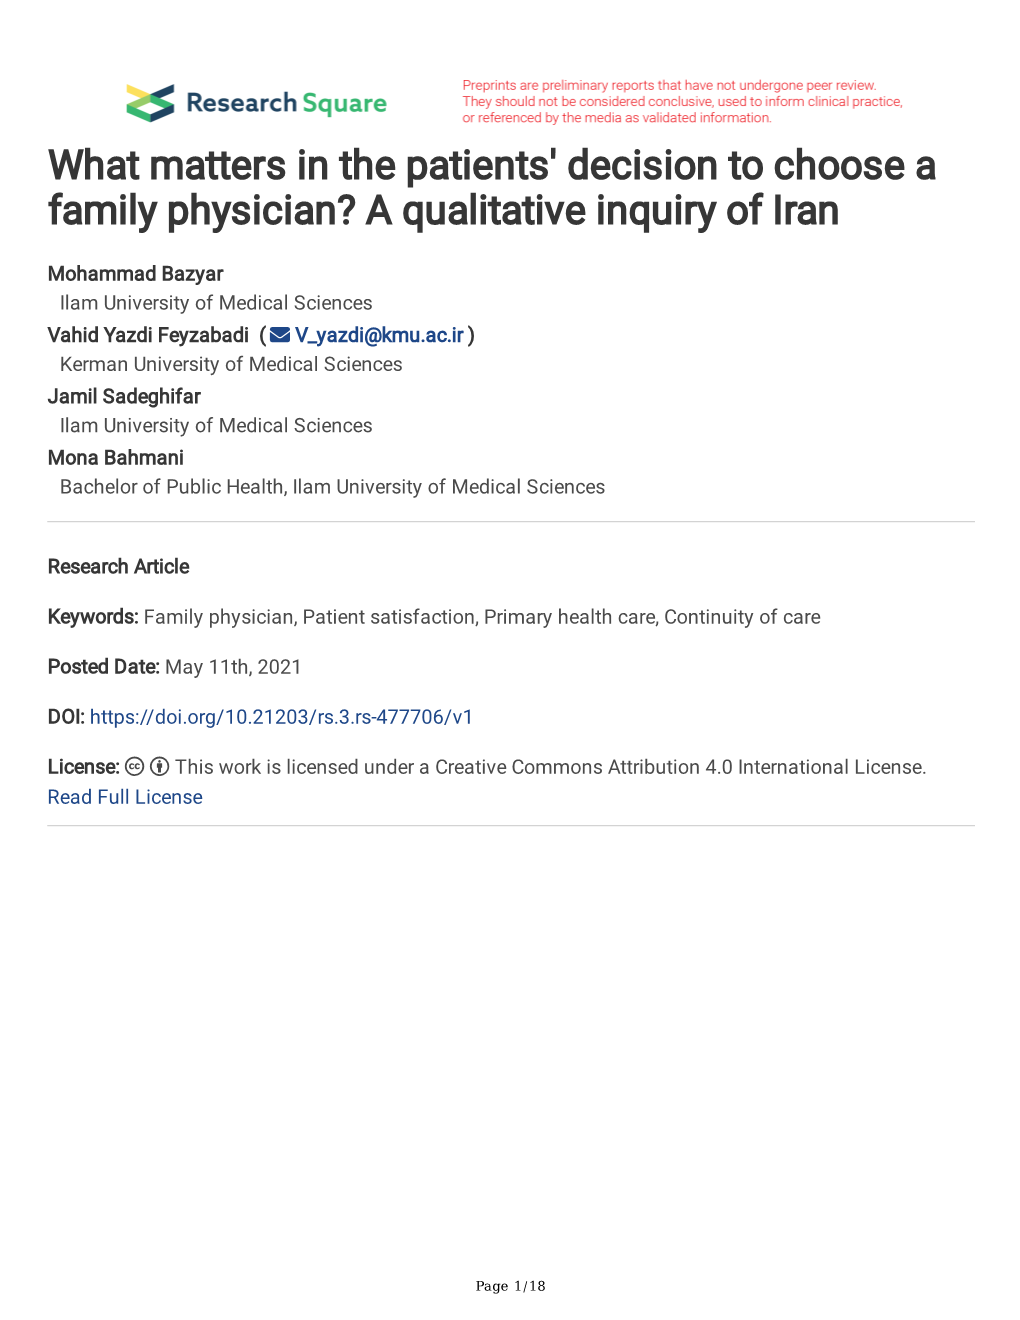 What Matters in the Patients' Decision to Choose a Family Physician? a Qualitative Inquiry of Iran